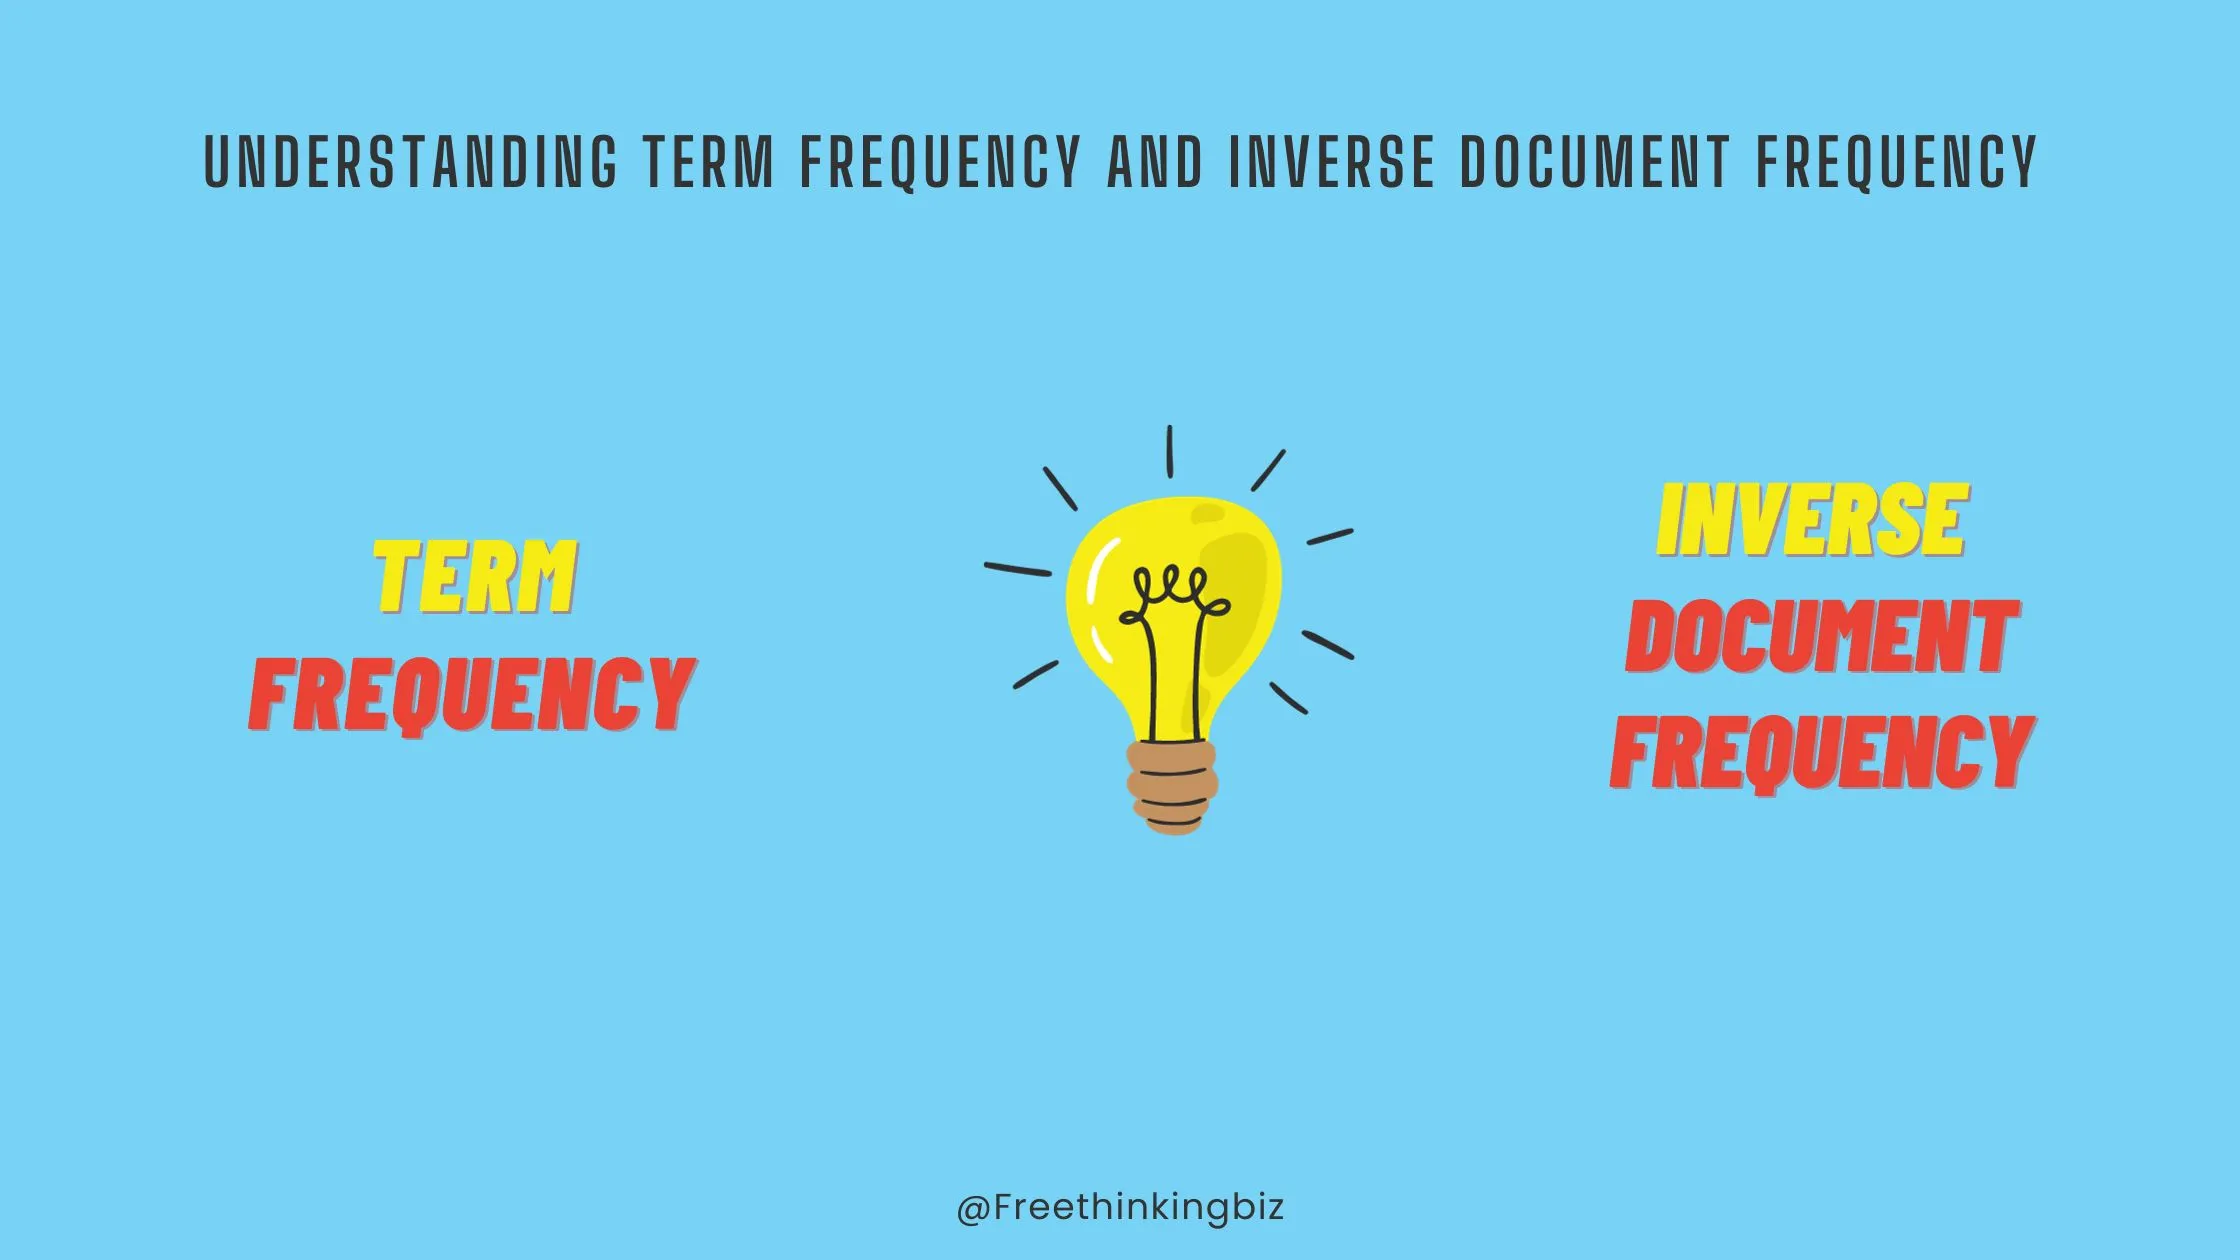 what is term frequency (TF) and Inverse Document Frequency (IDF)?